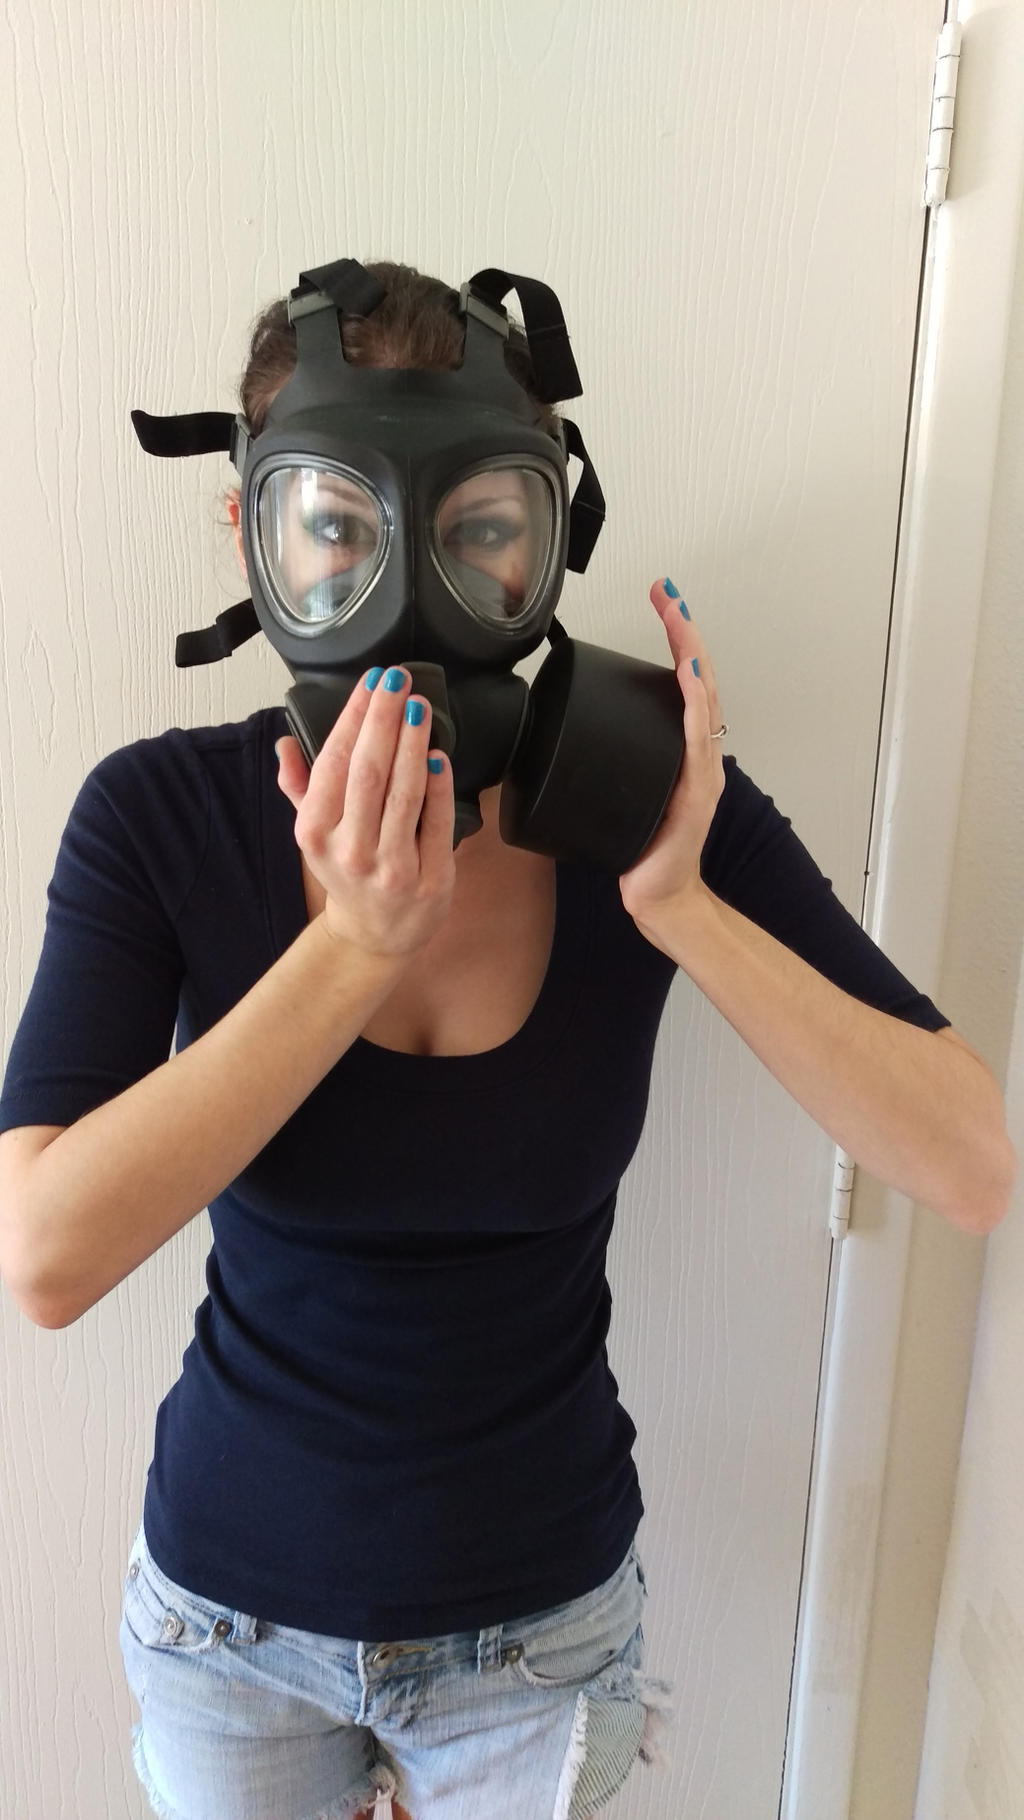 fit_test_with_m95_gas_mask_by_dominic100-d9ppf46.jpg